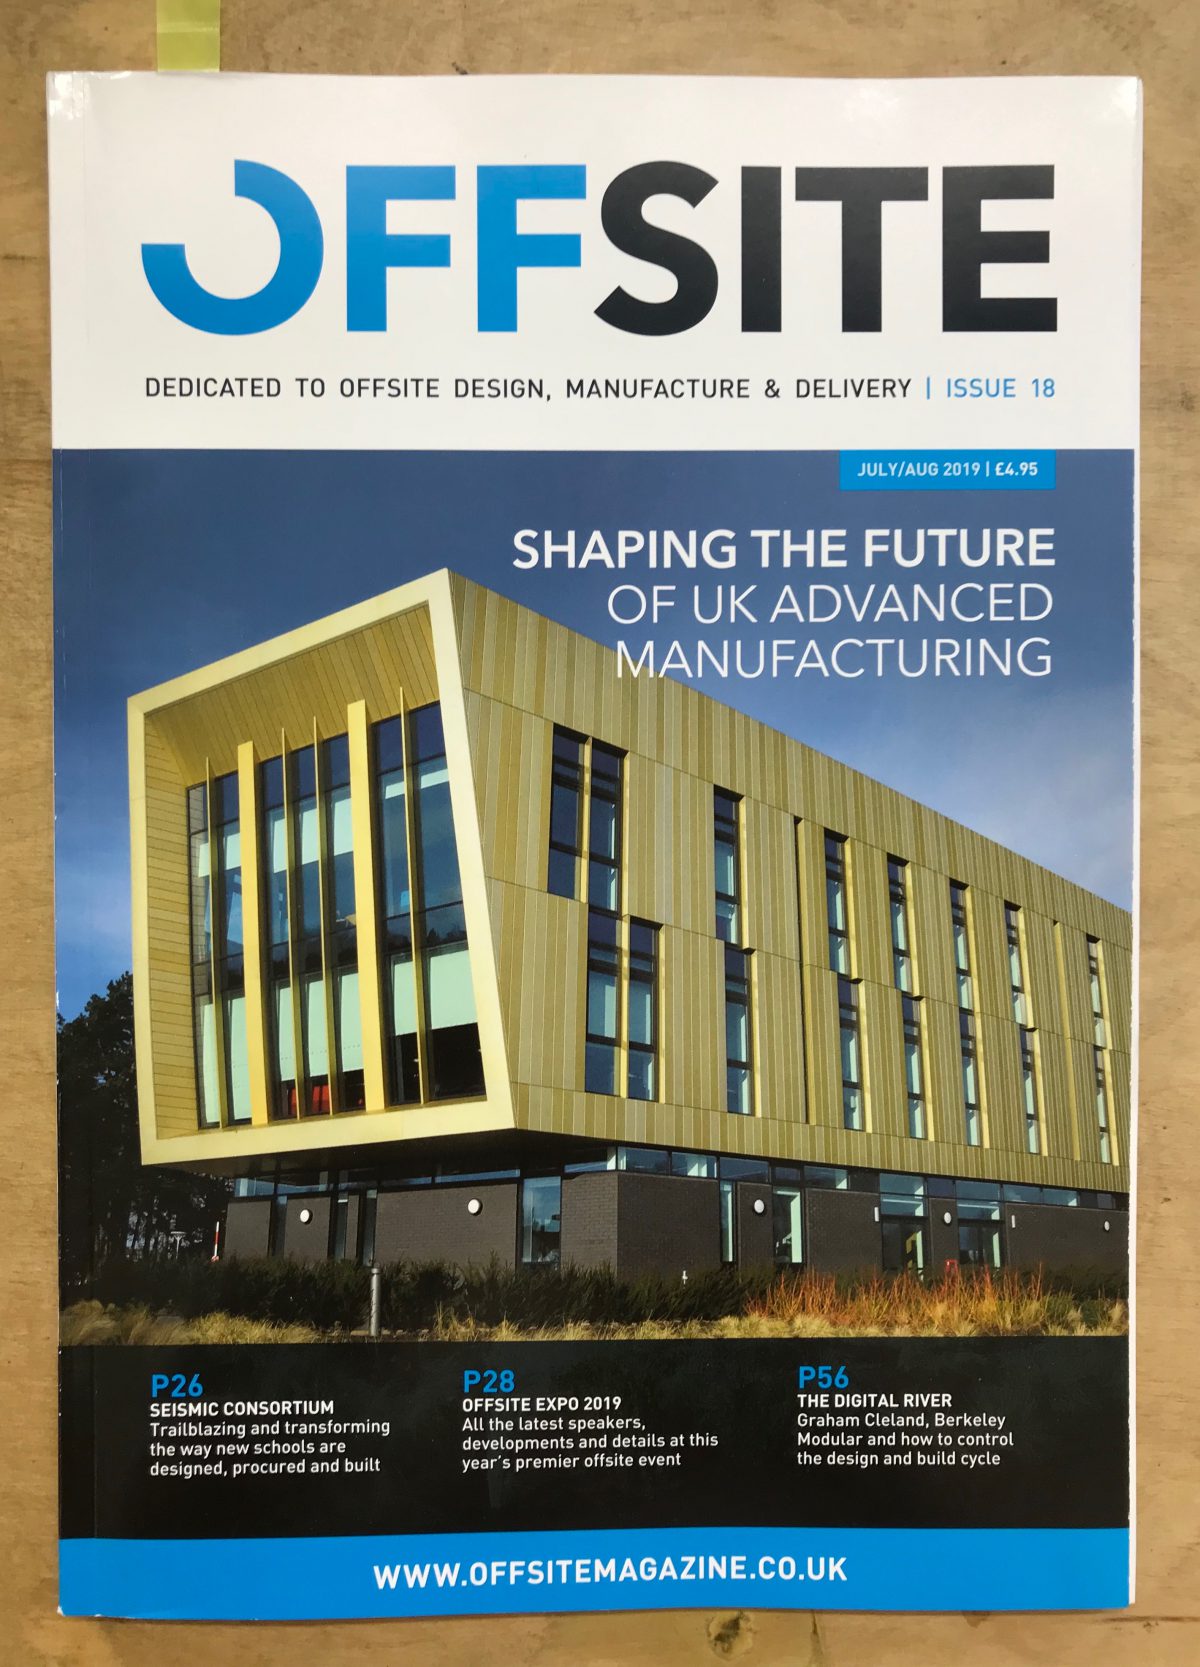 Offsite Publication Issue 18 (Site to Offsite)